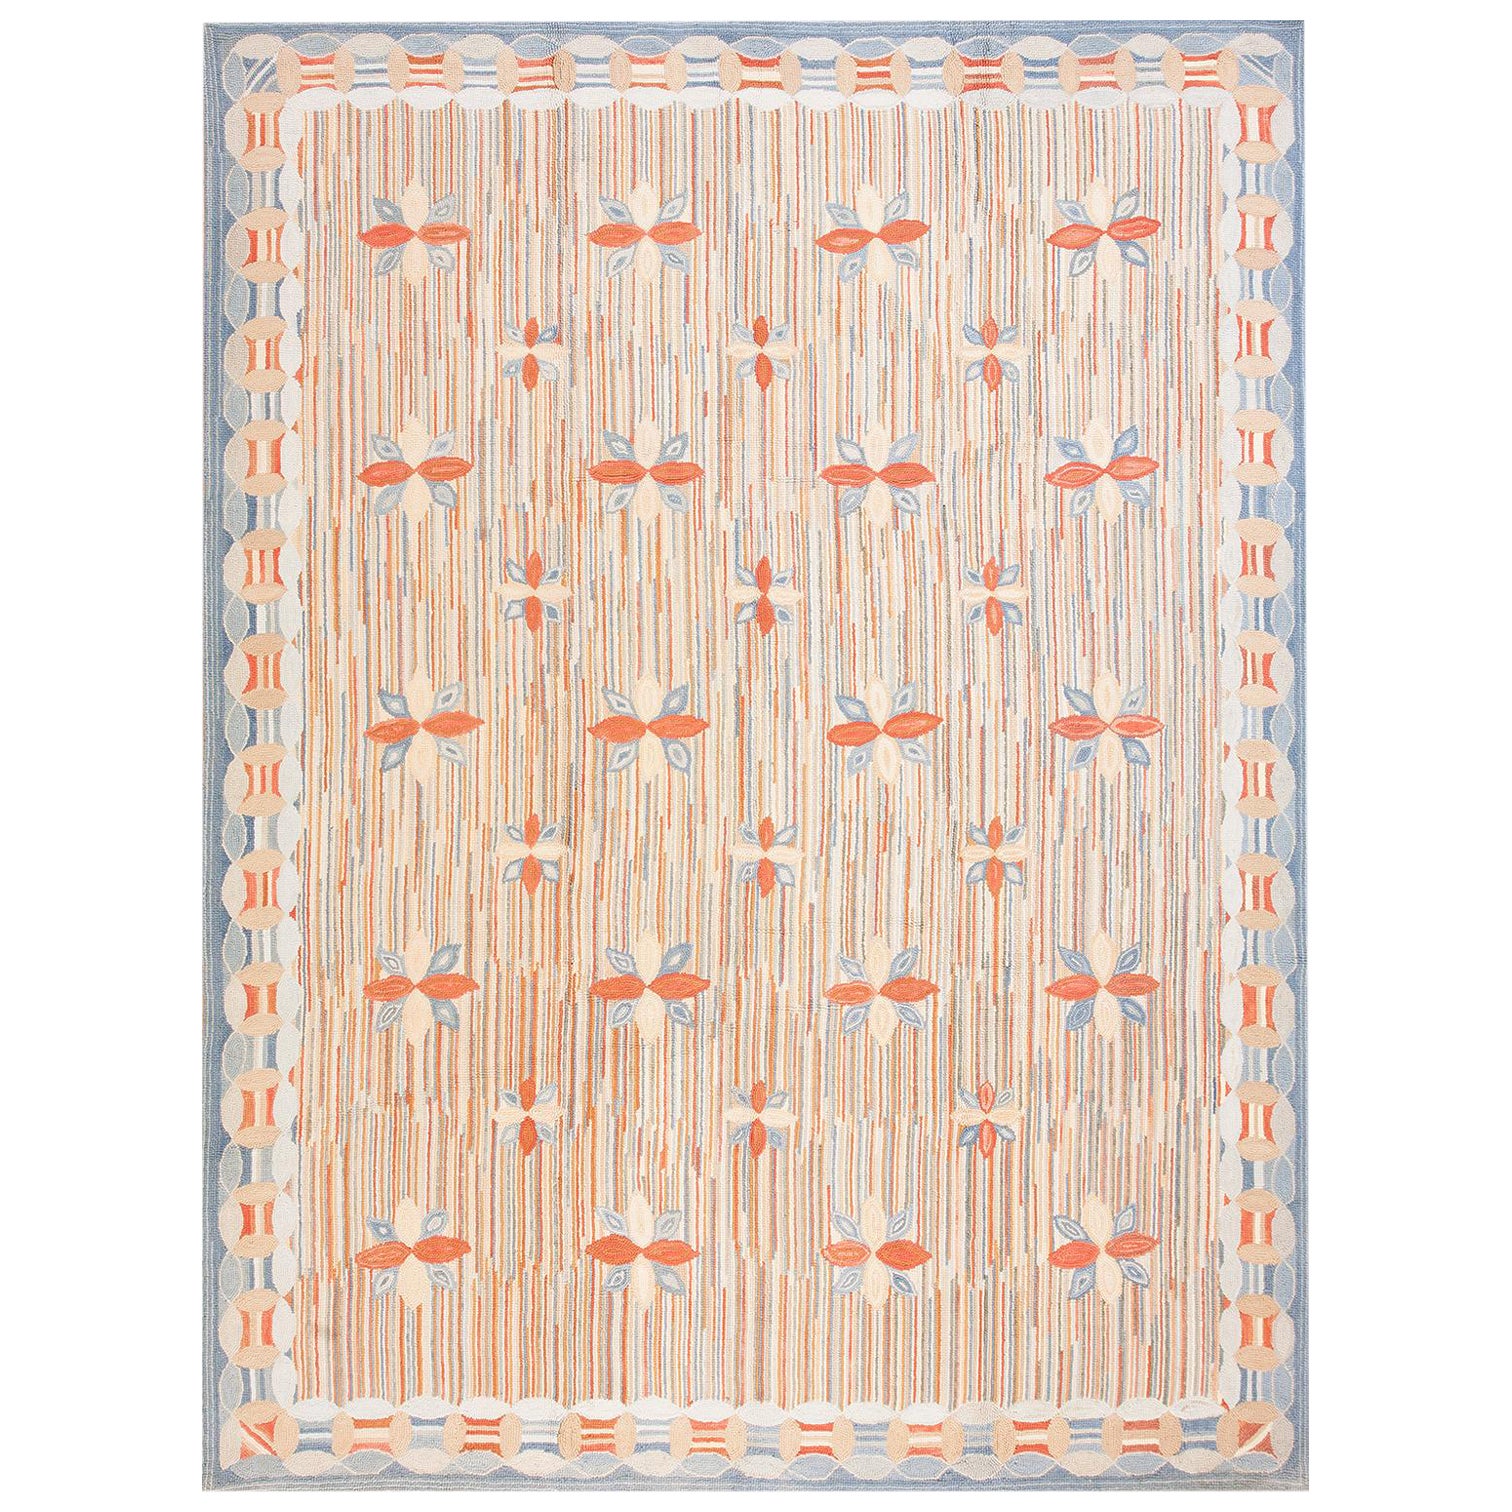 Contemporary Handmade Hooked Rug ( 10' x 10' - 305 x 305 cm ) For Sale